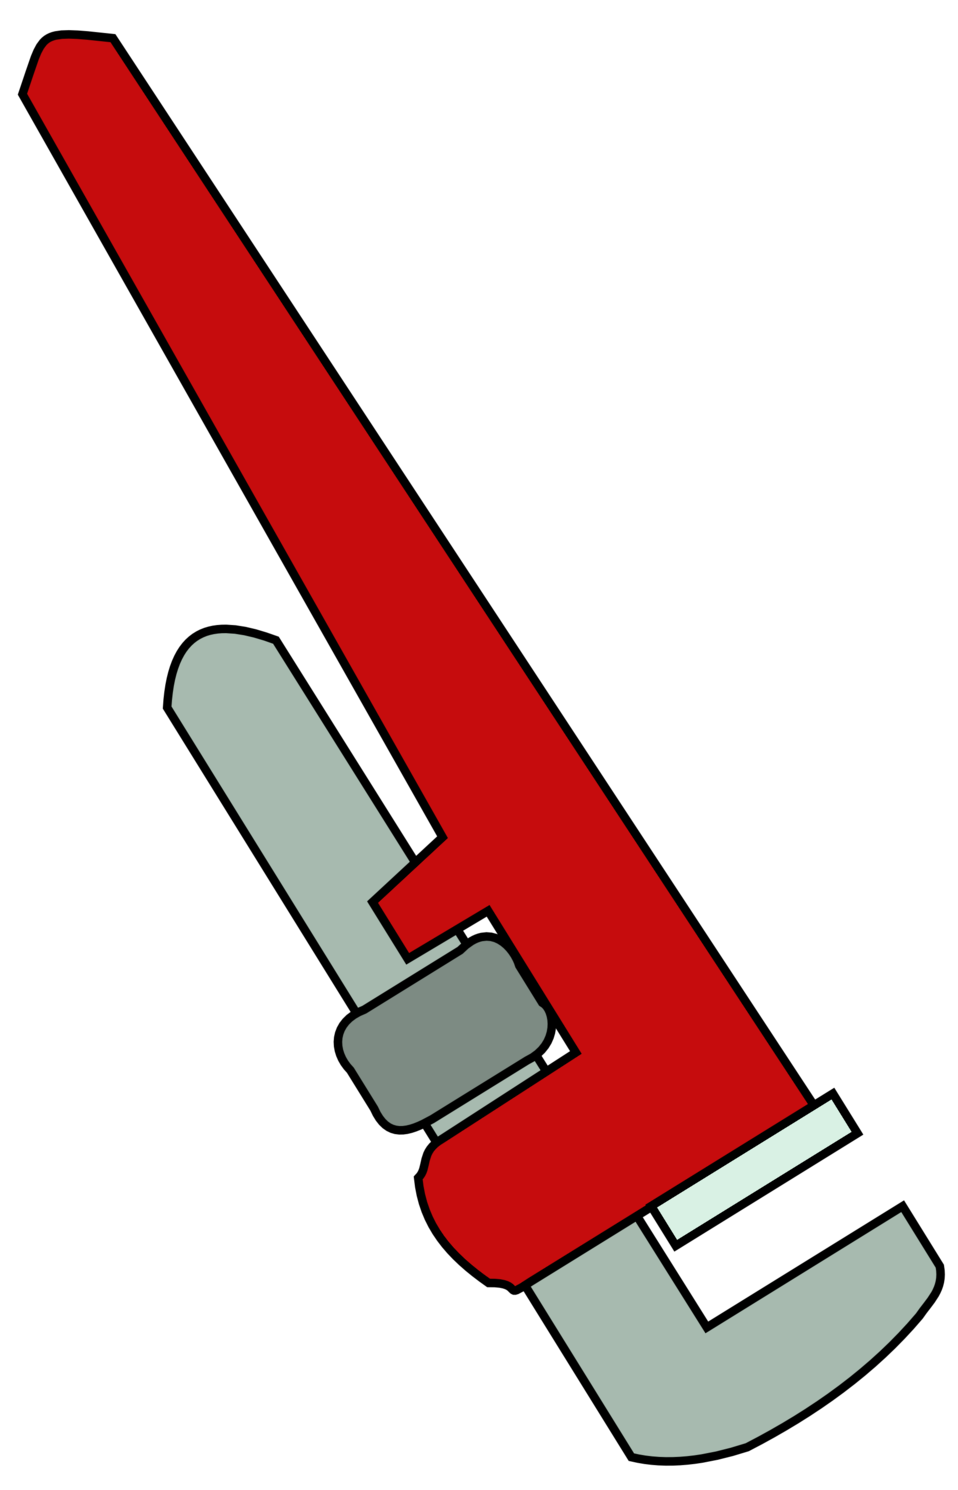 plumbing clipart crossed wrench